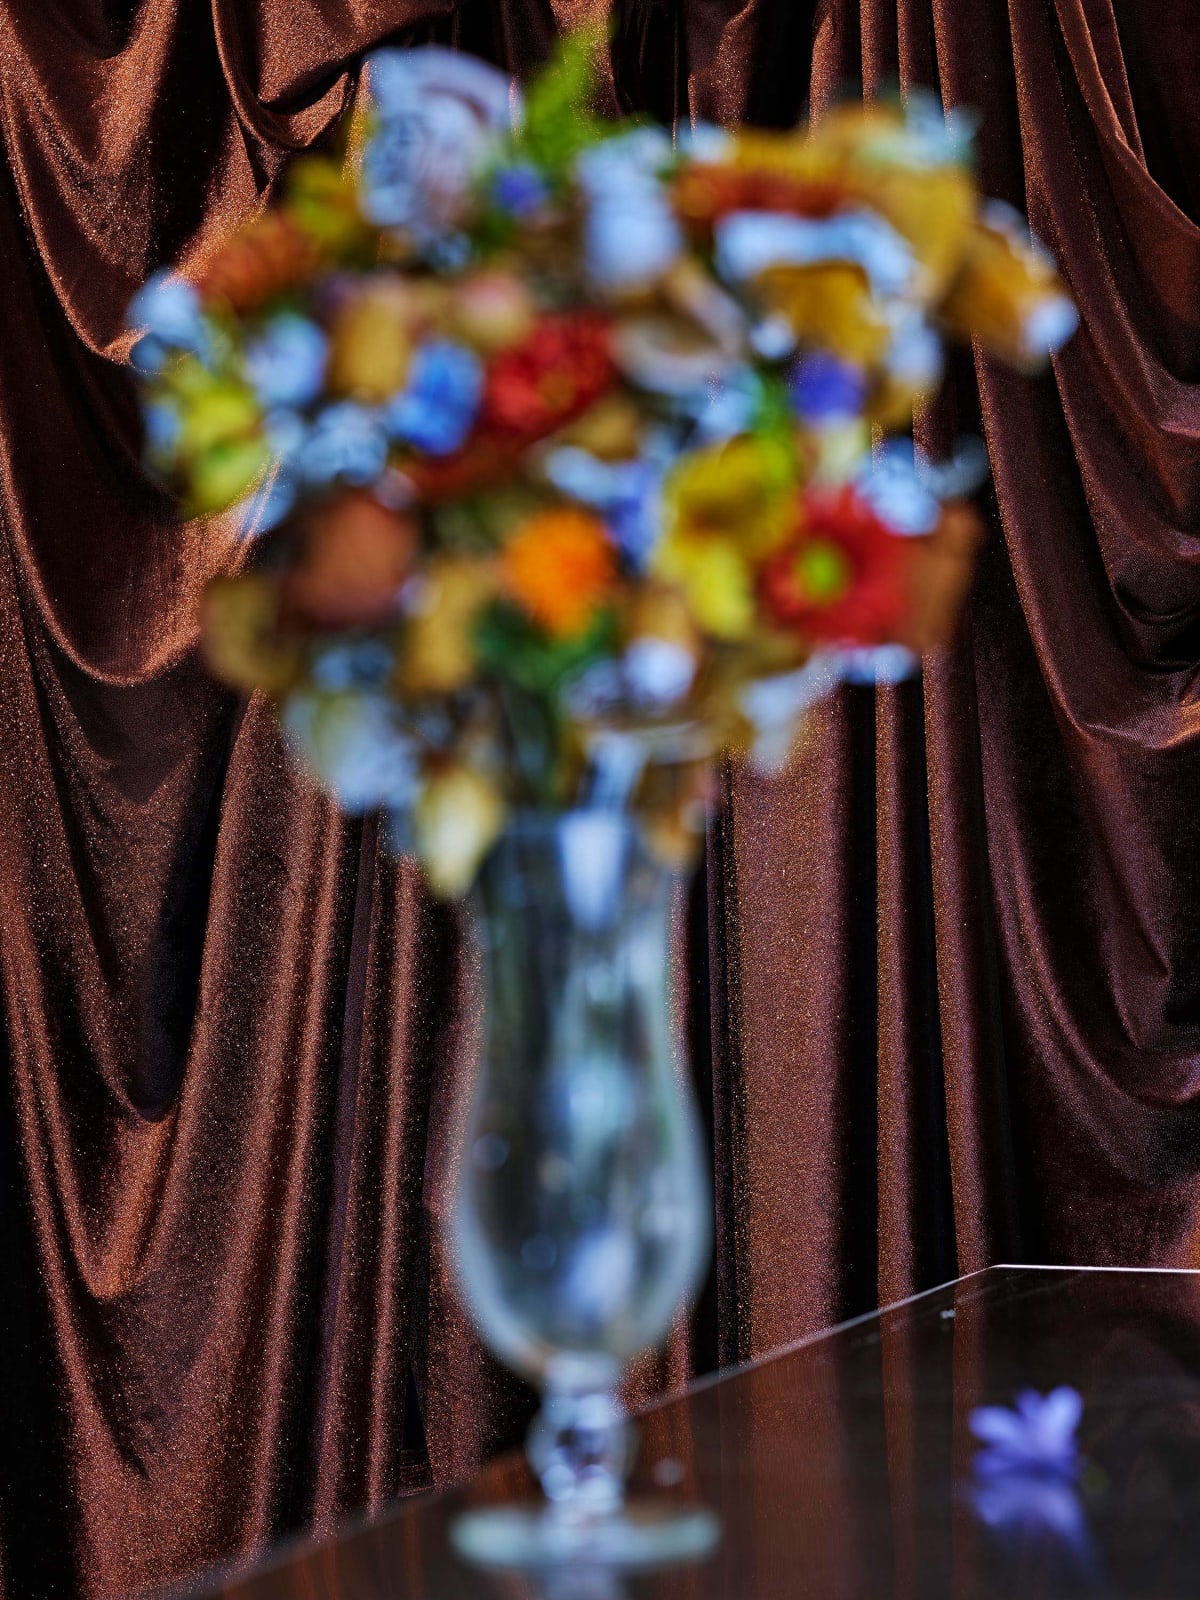 Abelardo Morell Flowers for Lisa #70 After Douglas Sirk vase of brightly colored Technicolor flowers out of focus with glittering brown curtain 